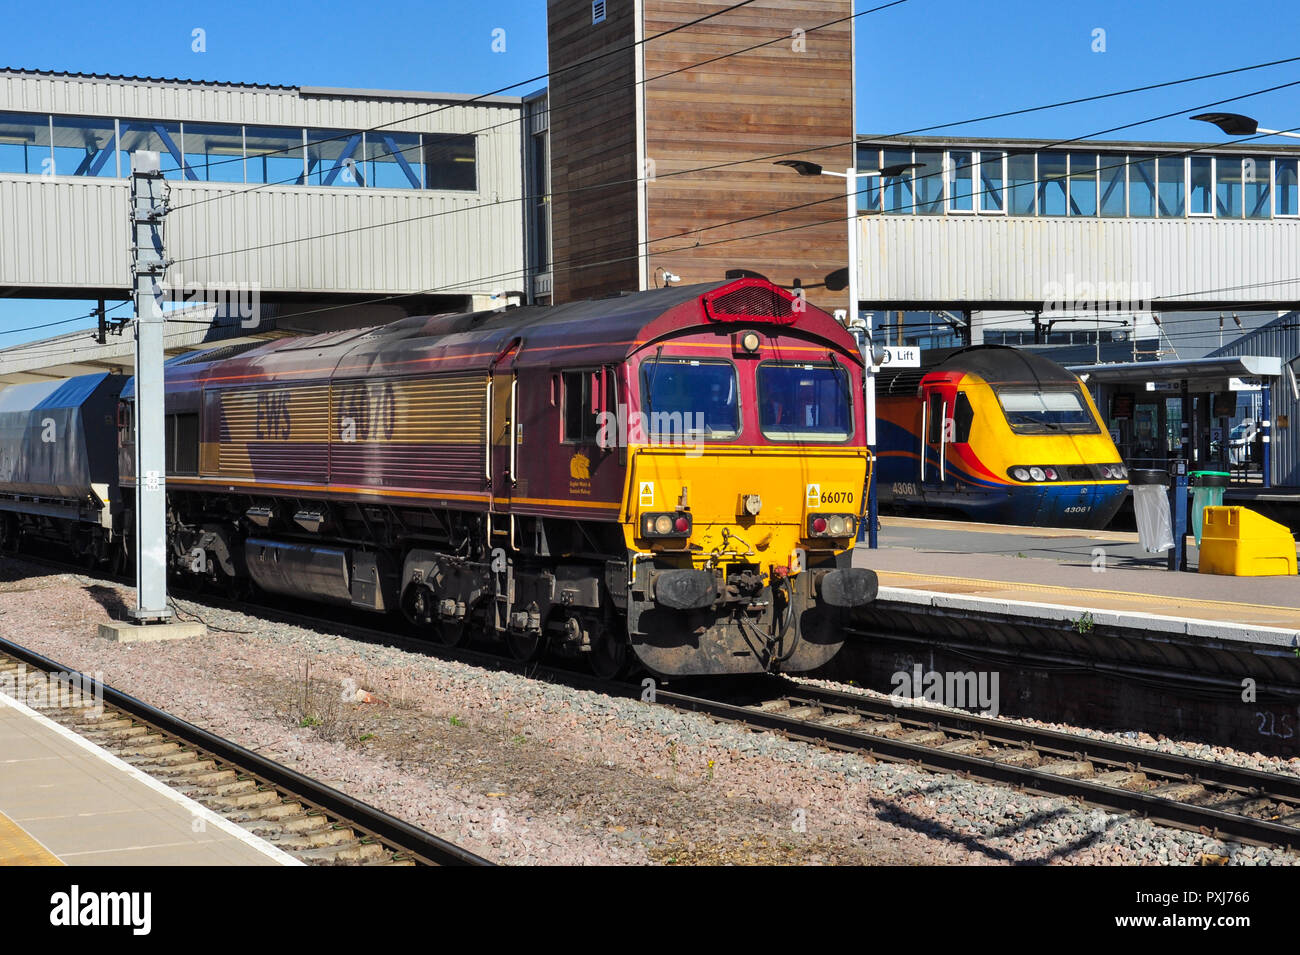 EWS Class 66 diesel locomotive heads a southbound freight through the station at Peterborough, Cambridgeshire, England, UK Stock Photo